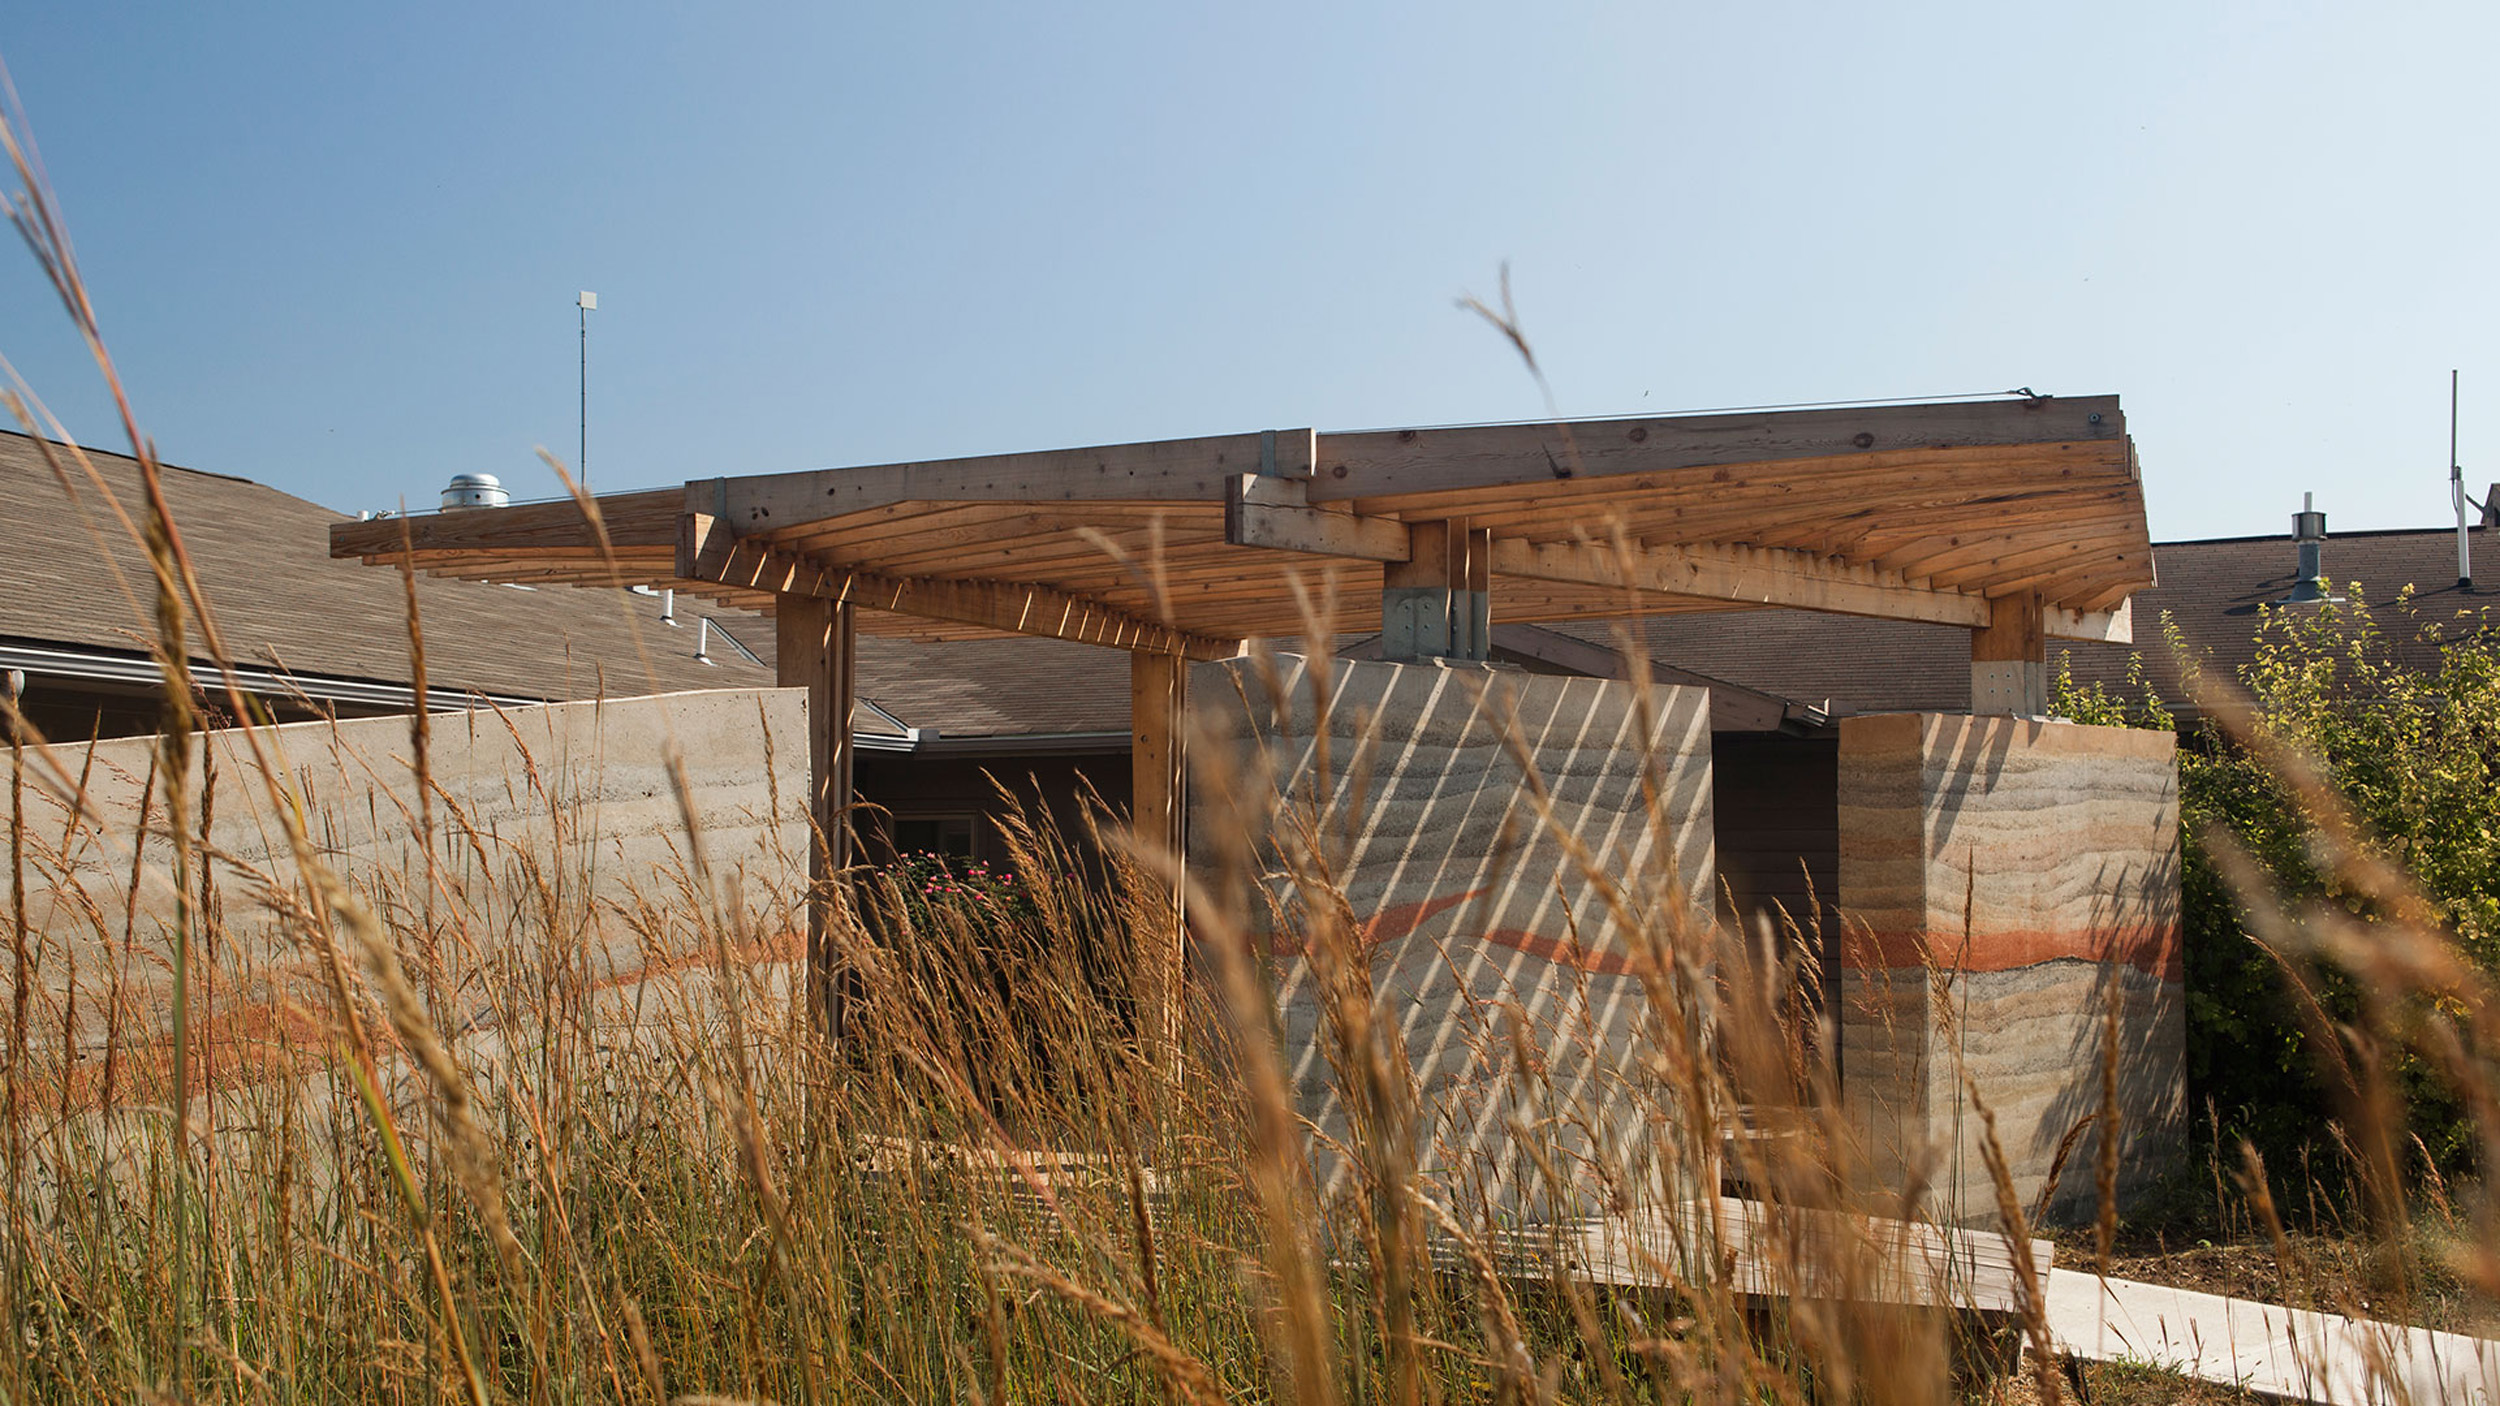 Armitage Pavilion, a series of rammed earth walls supporting a timber sunshade